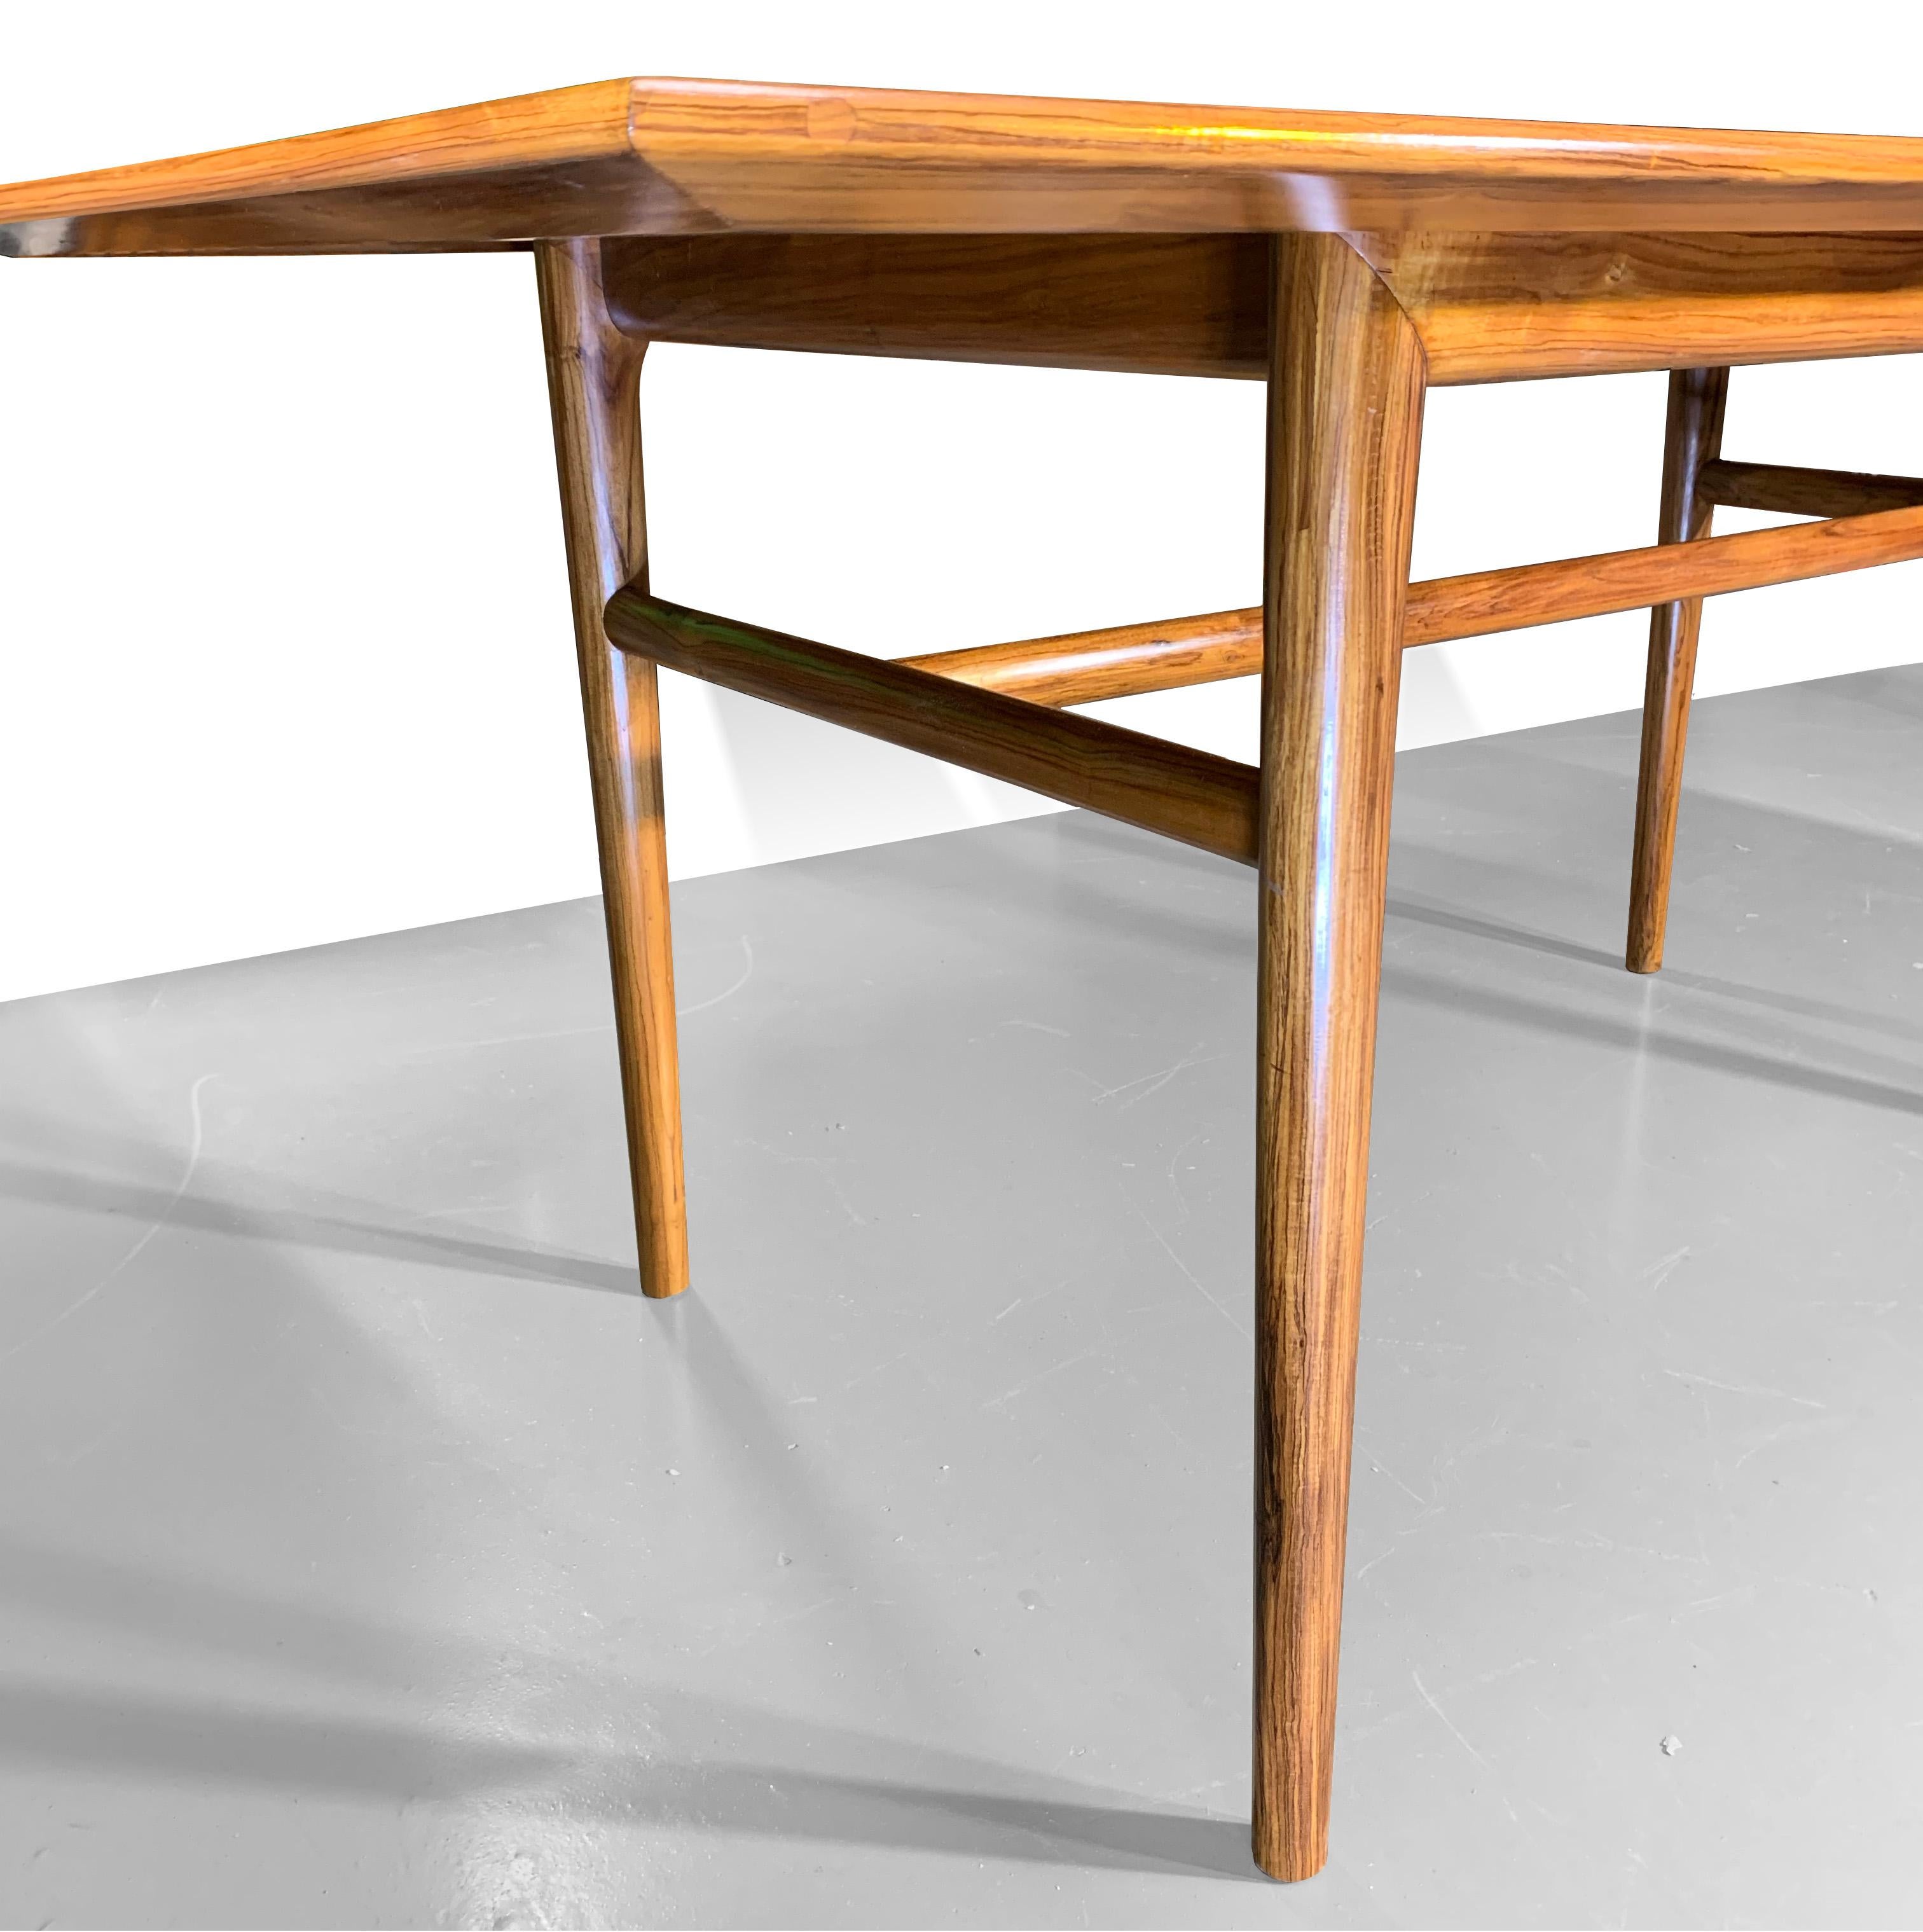 Mid-Century Modern Dining Table by Branco & Preto, Brazil, 1950s For Sale